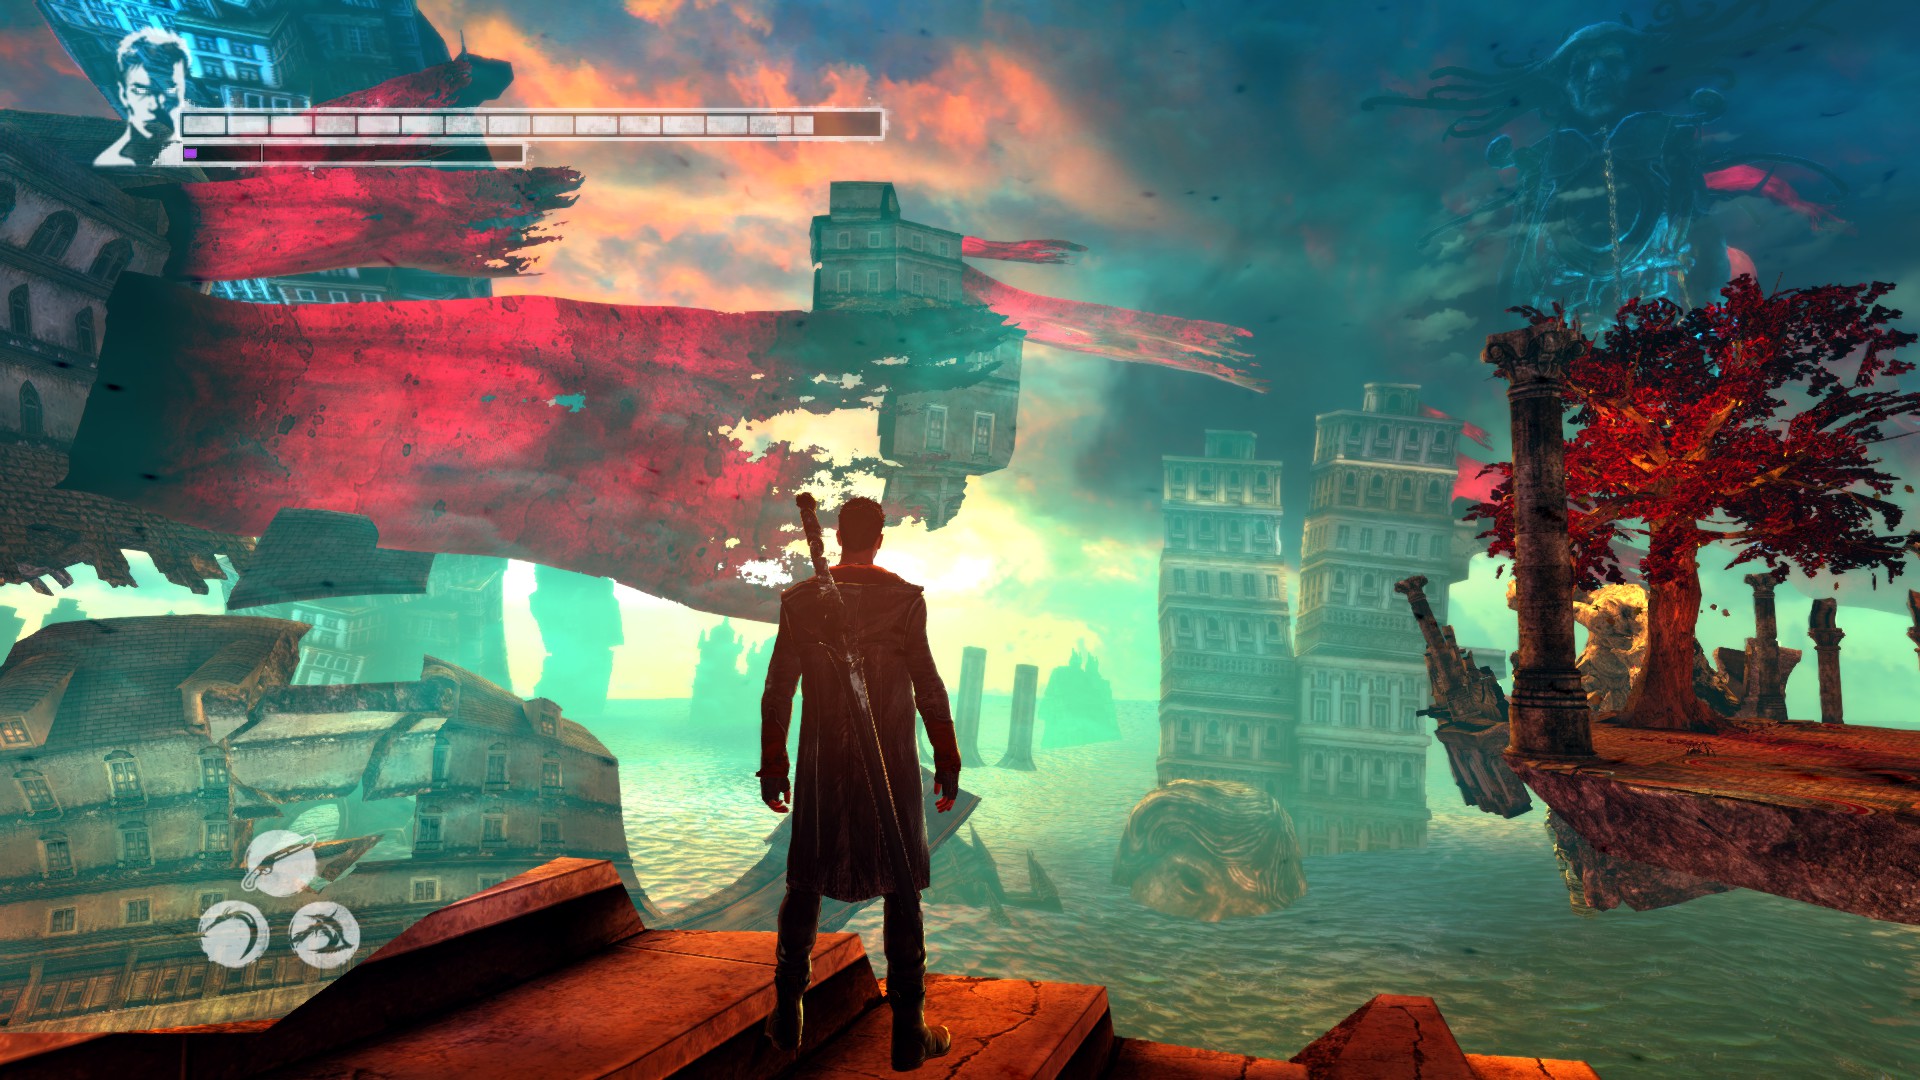 REVIEW – DmC: DEVIL MAY CRY, VERGIL'S DOWNFALL DLC. – Cheap Boss Attack